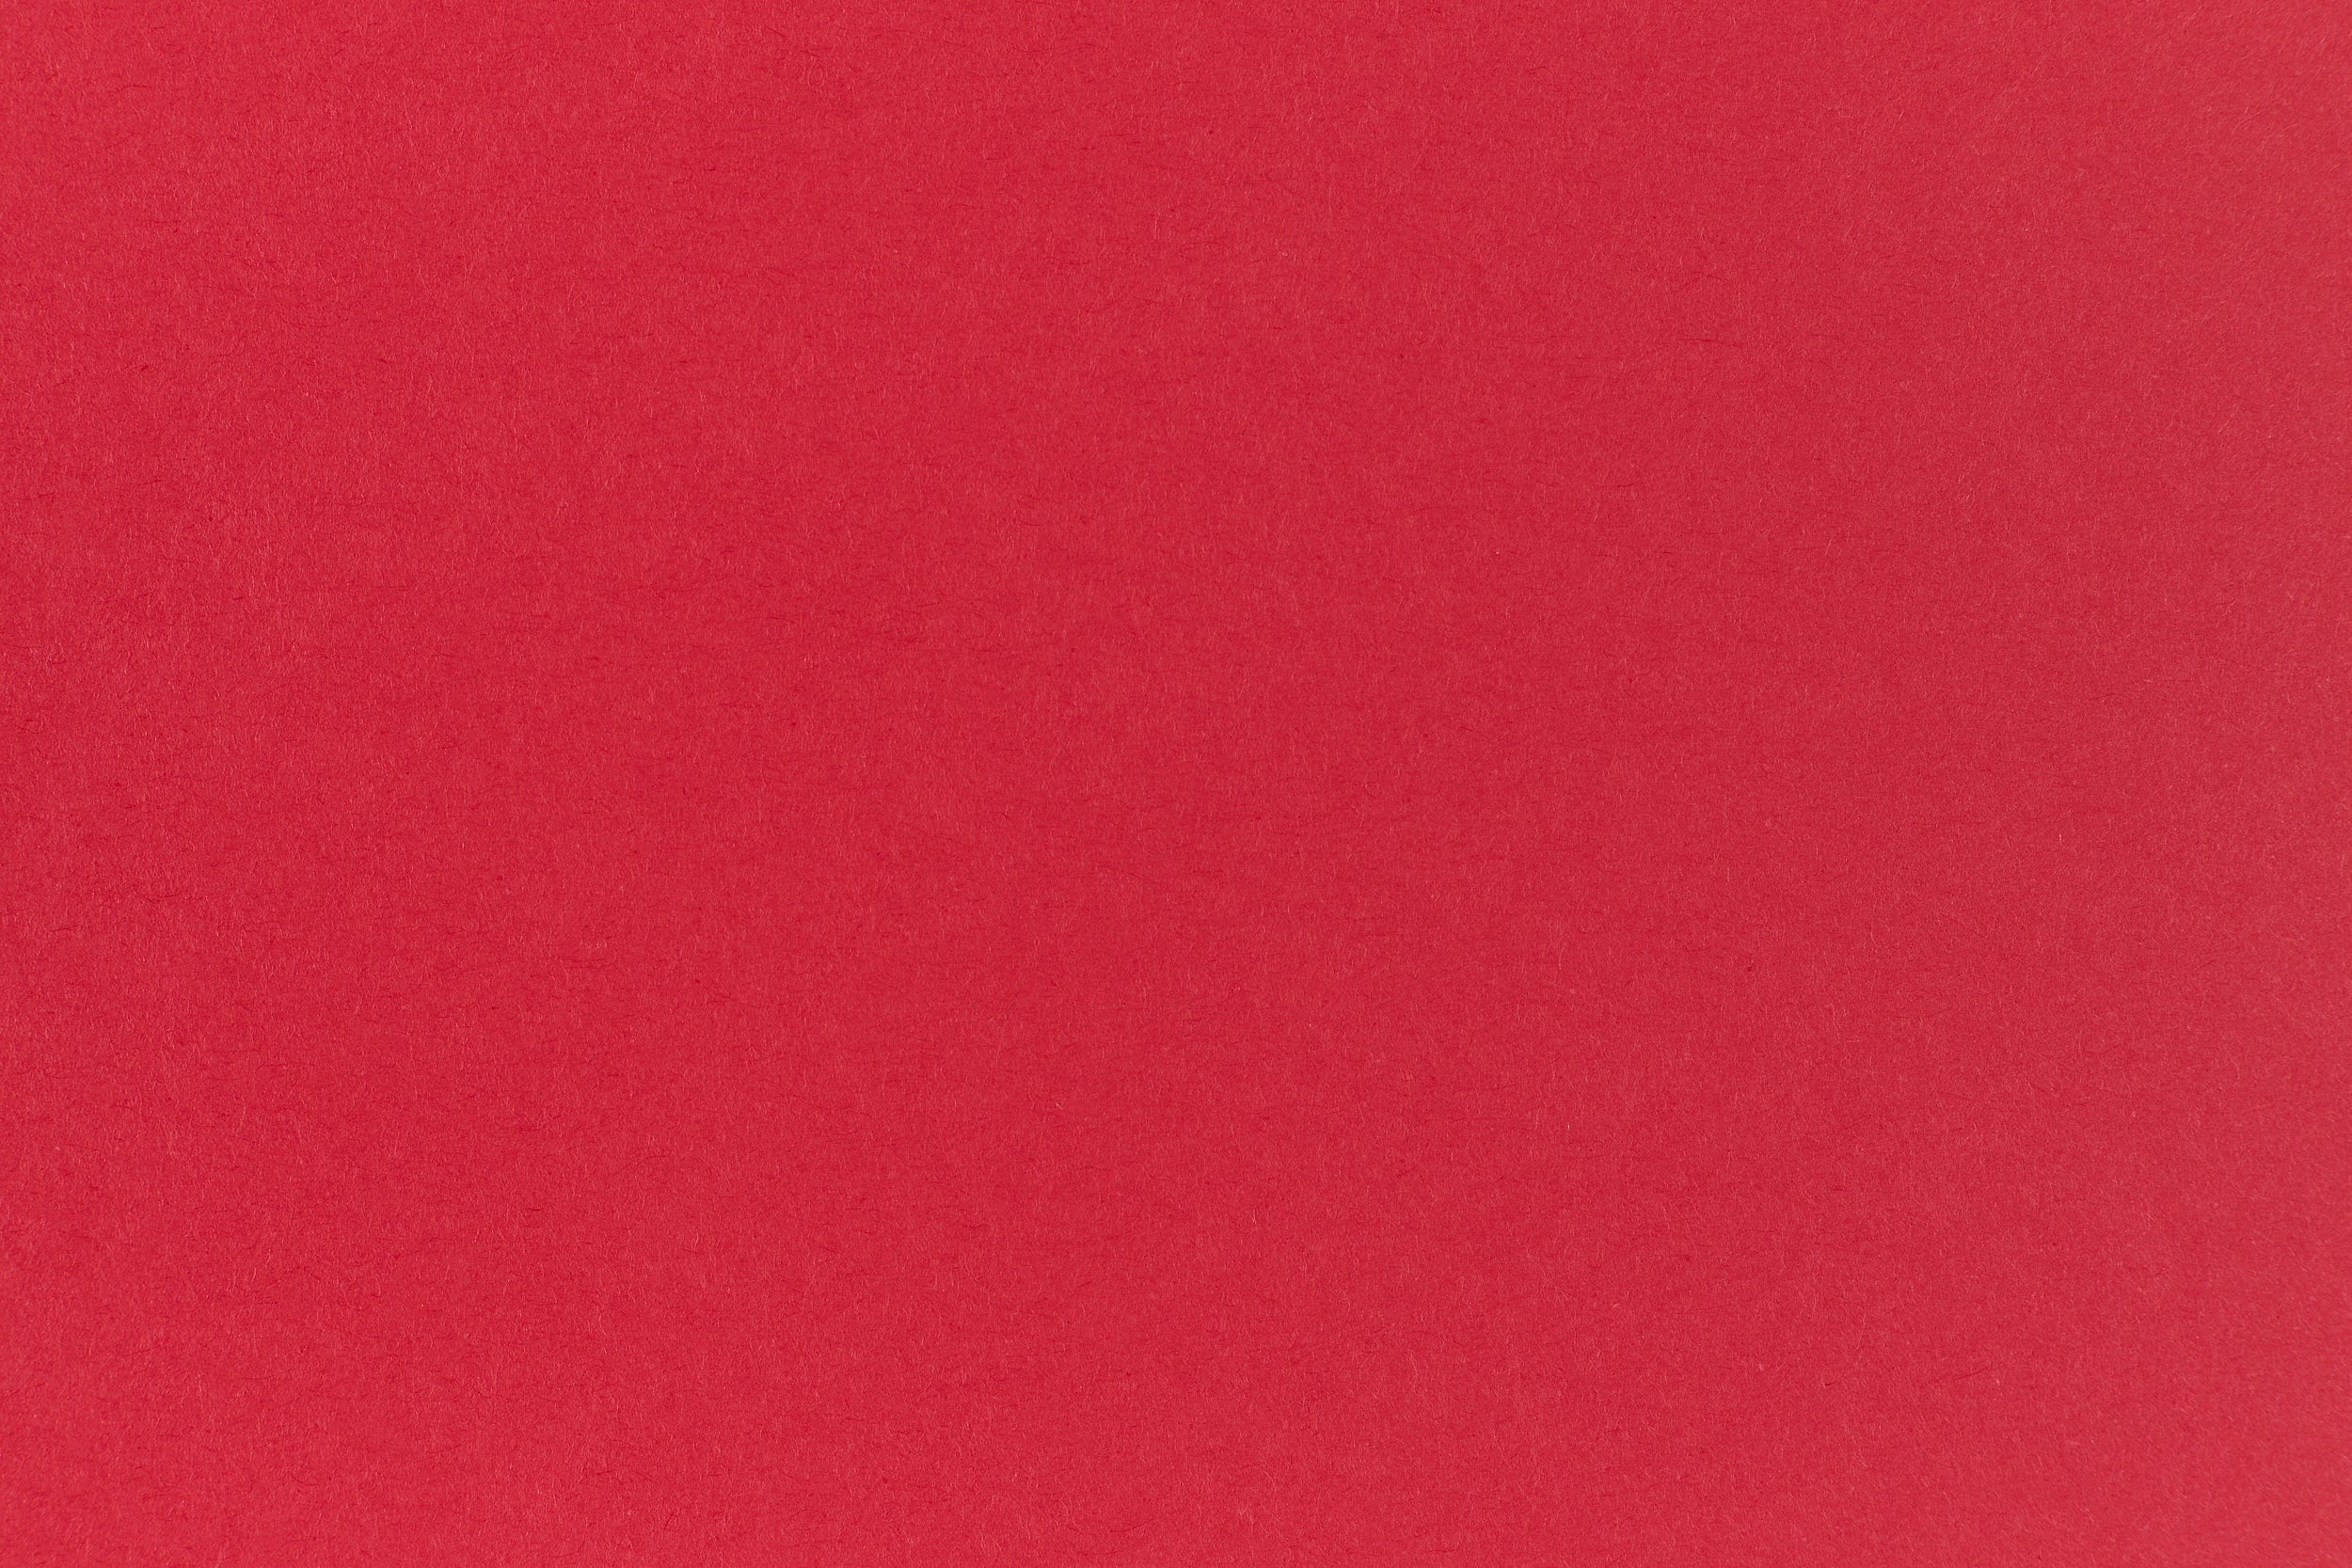 light red background